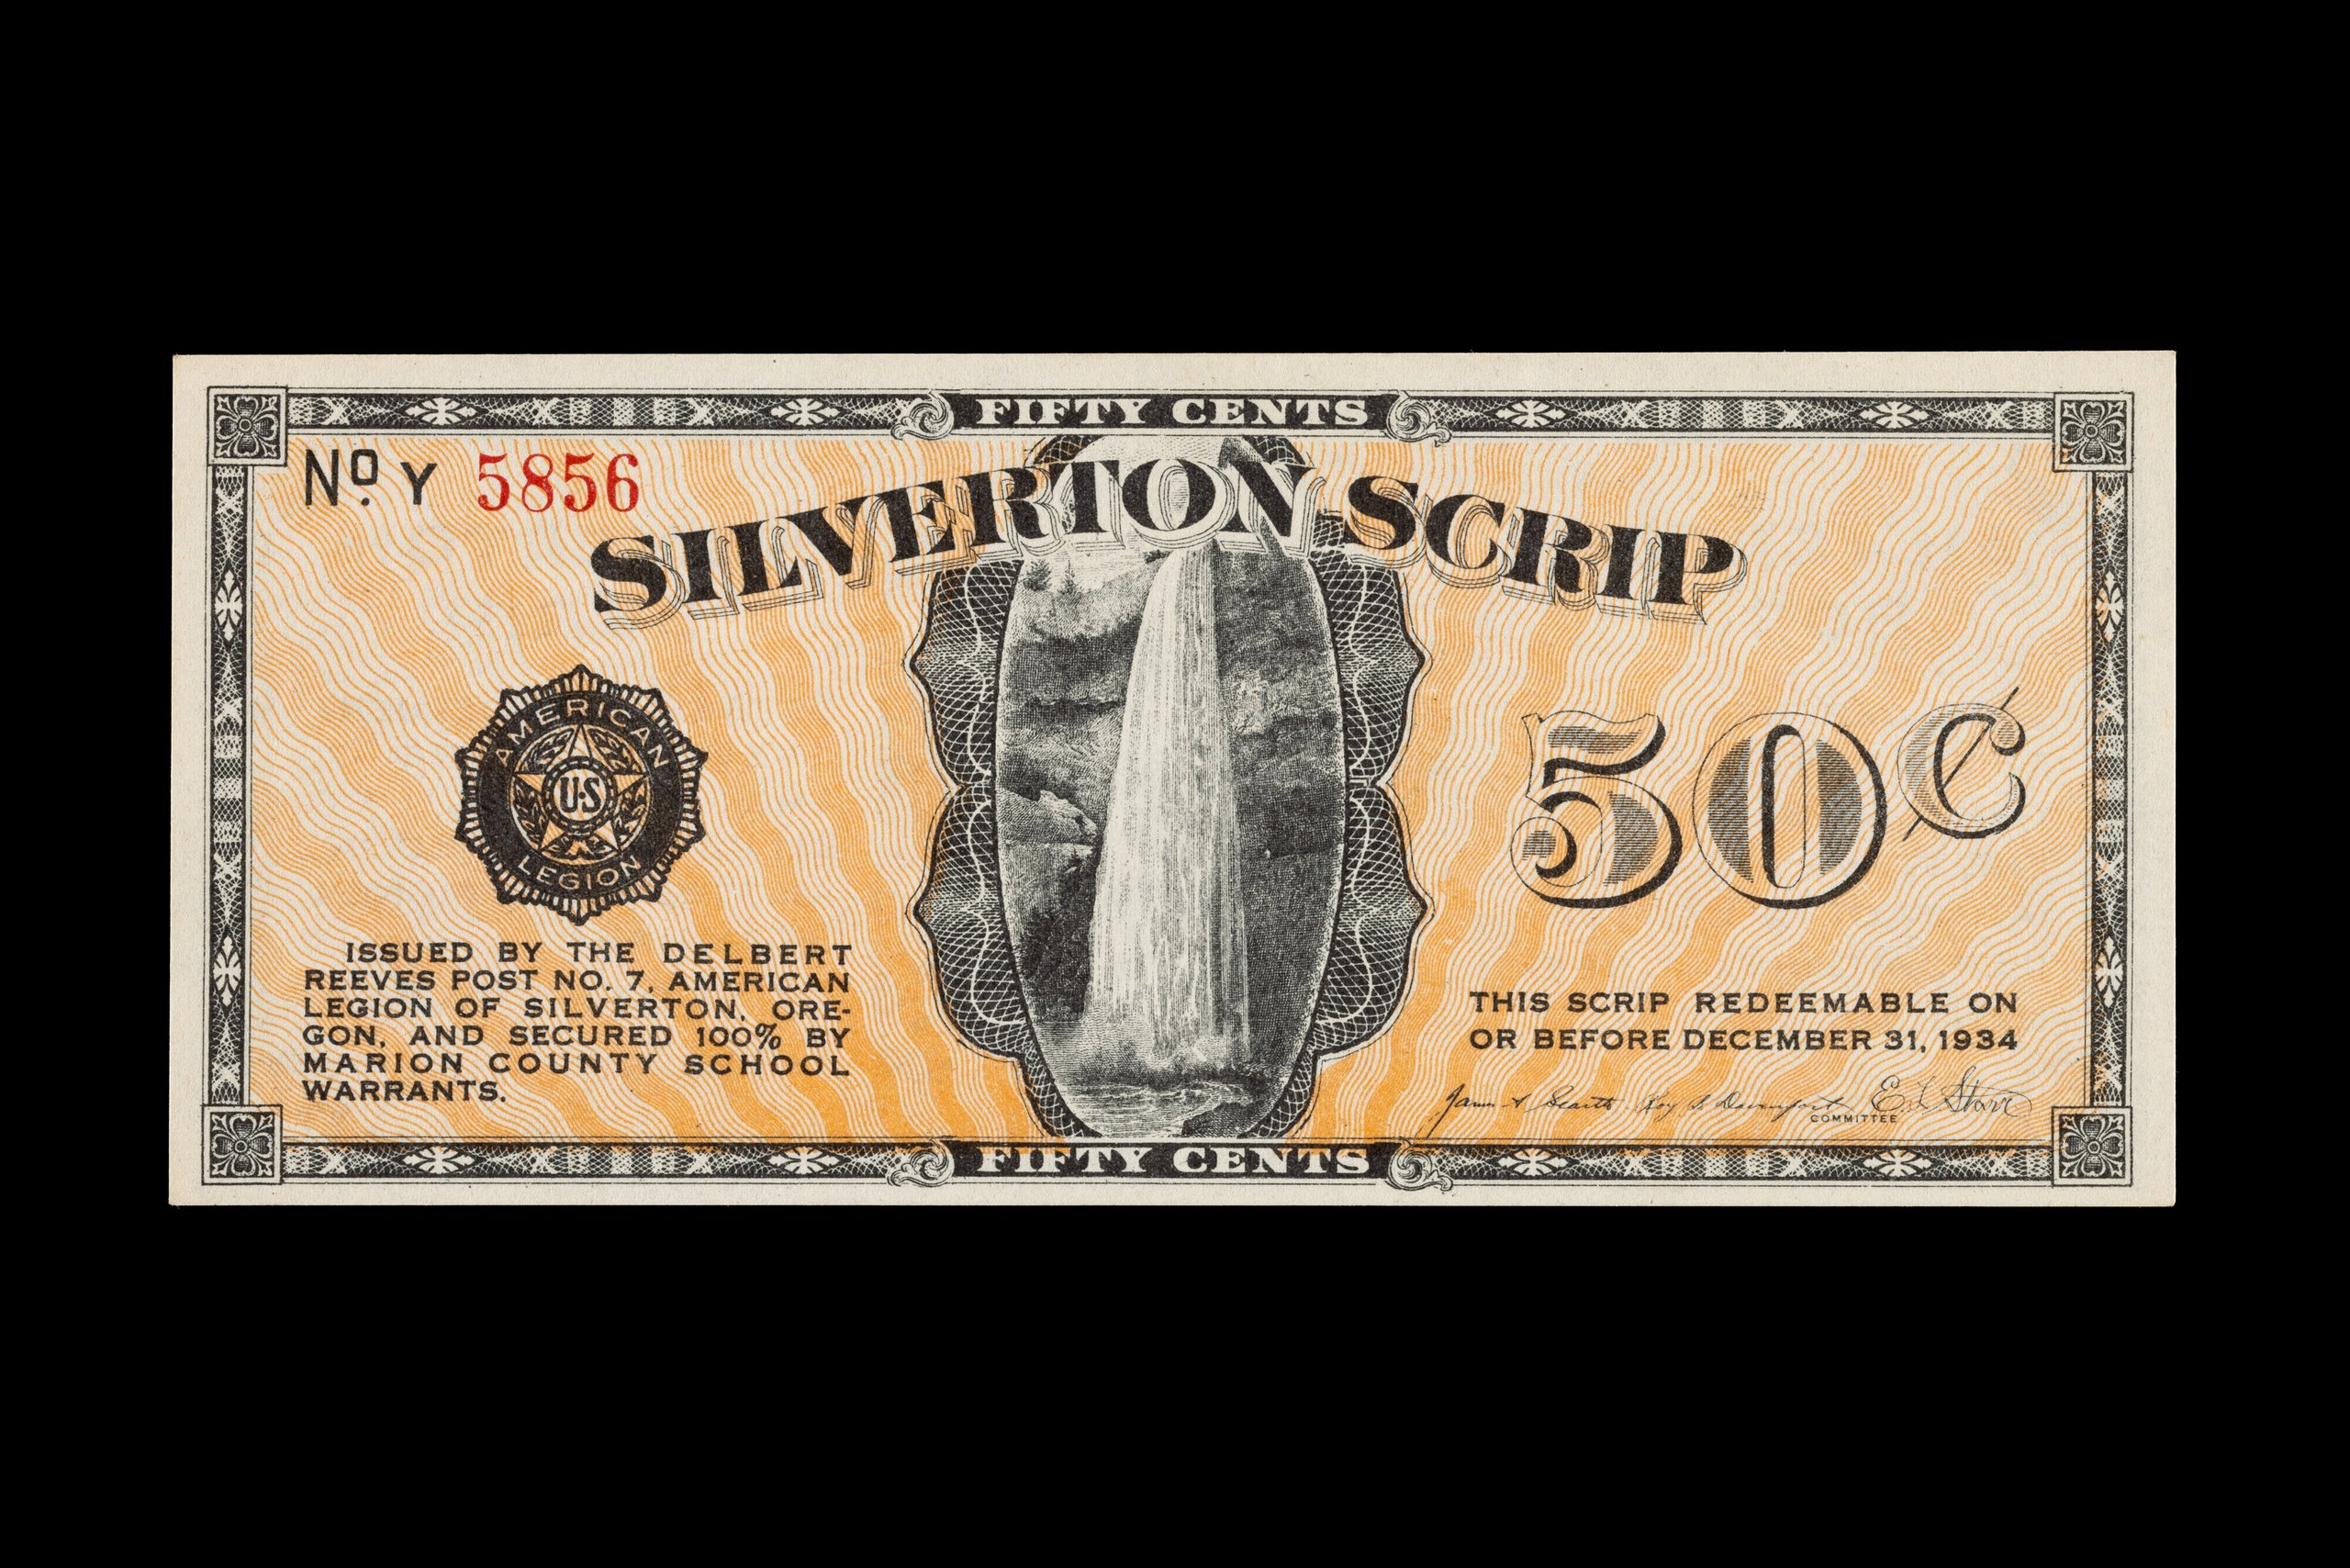 American Fifty Cent banknote